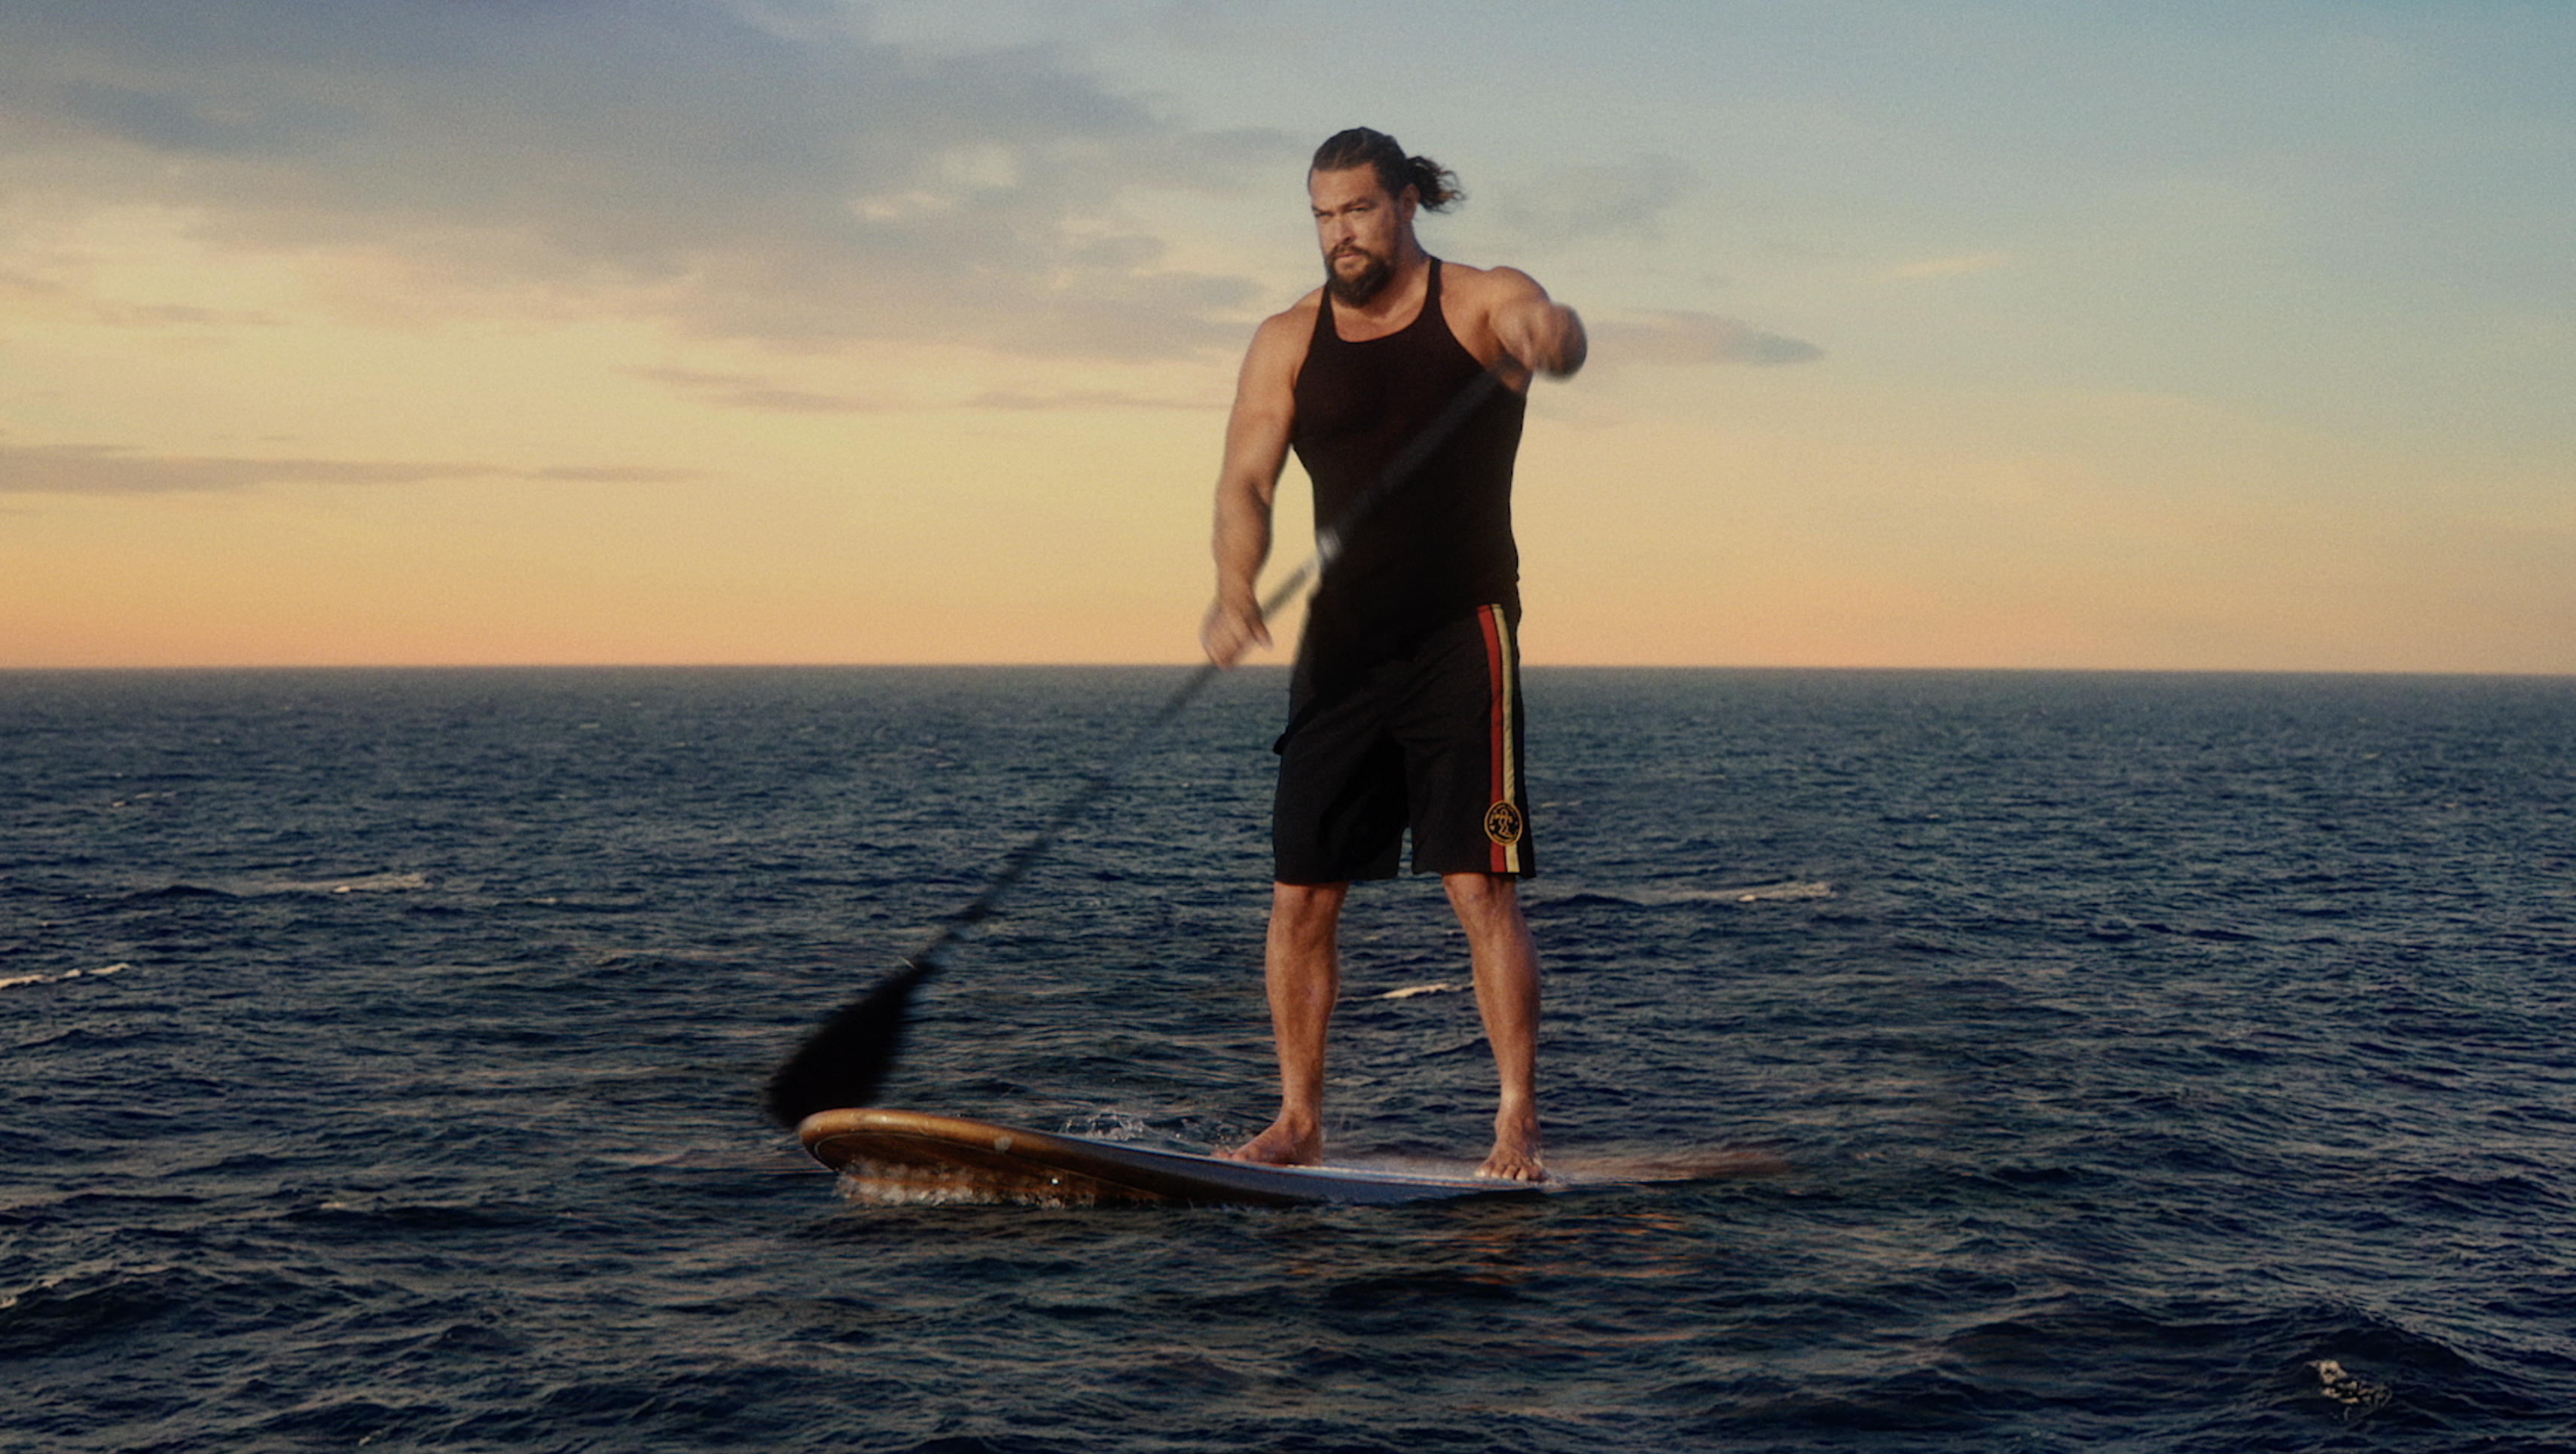 Yas Island Appoints Jason Mamoa as 'Chief Island Officer' in Latest Campaign